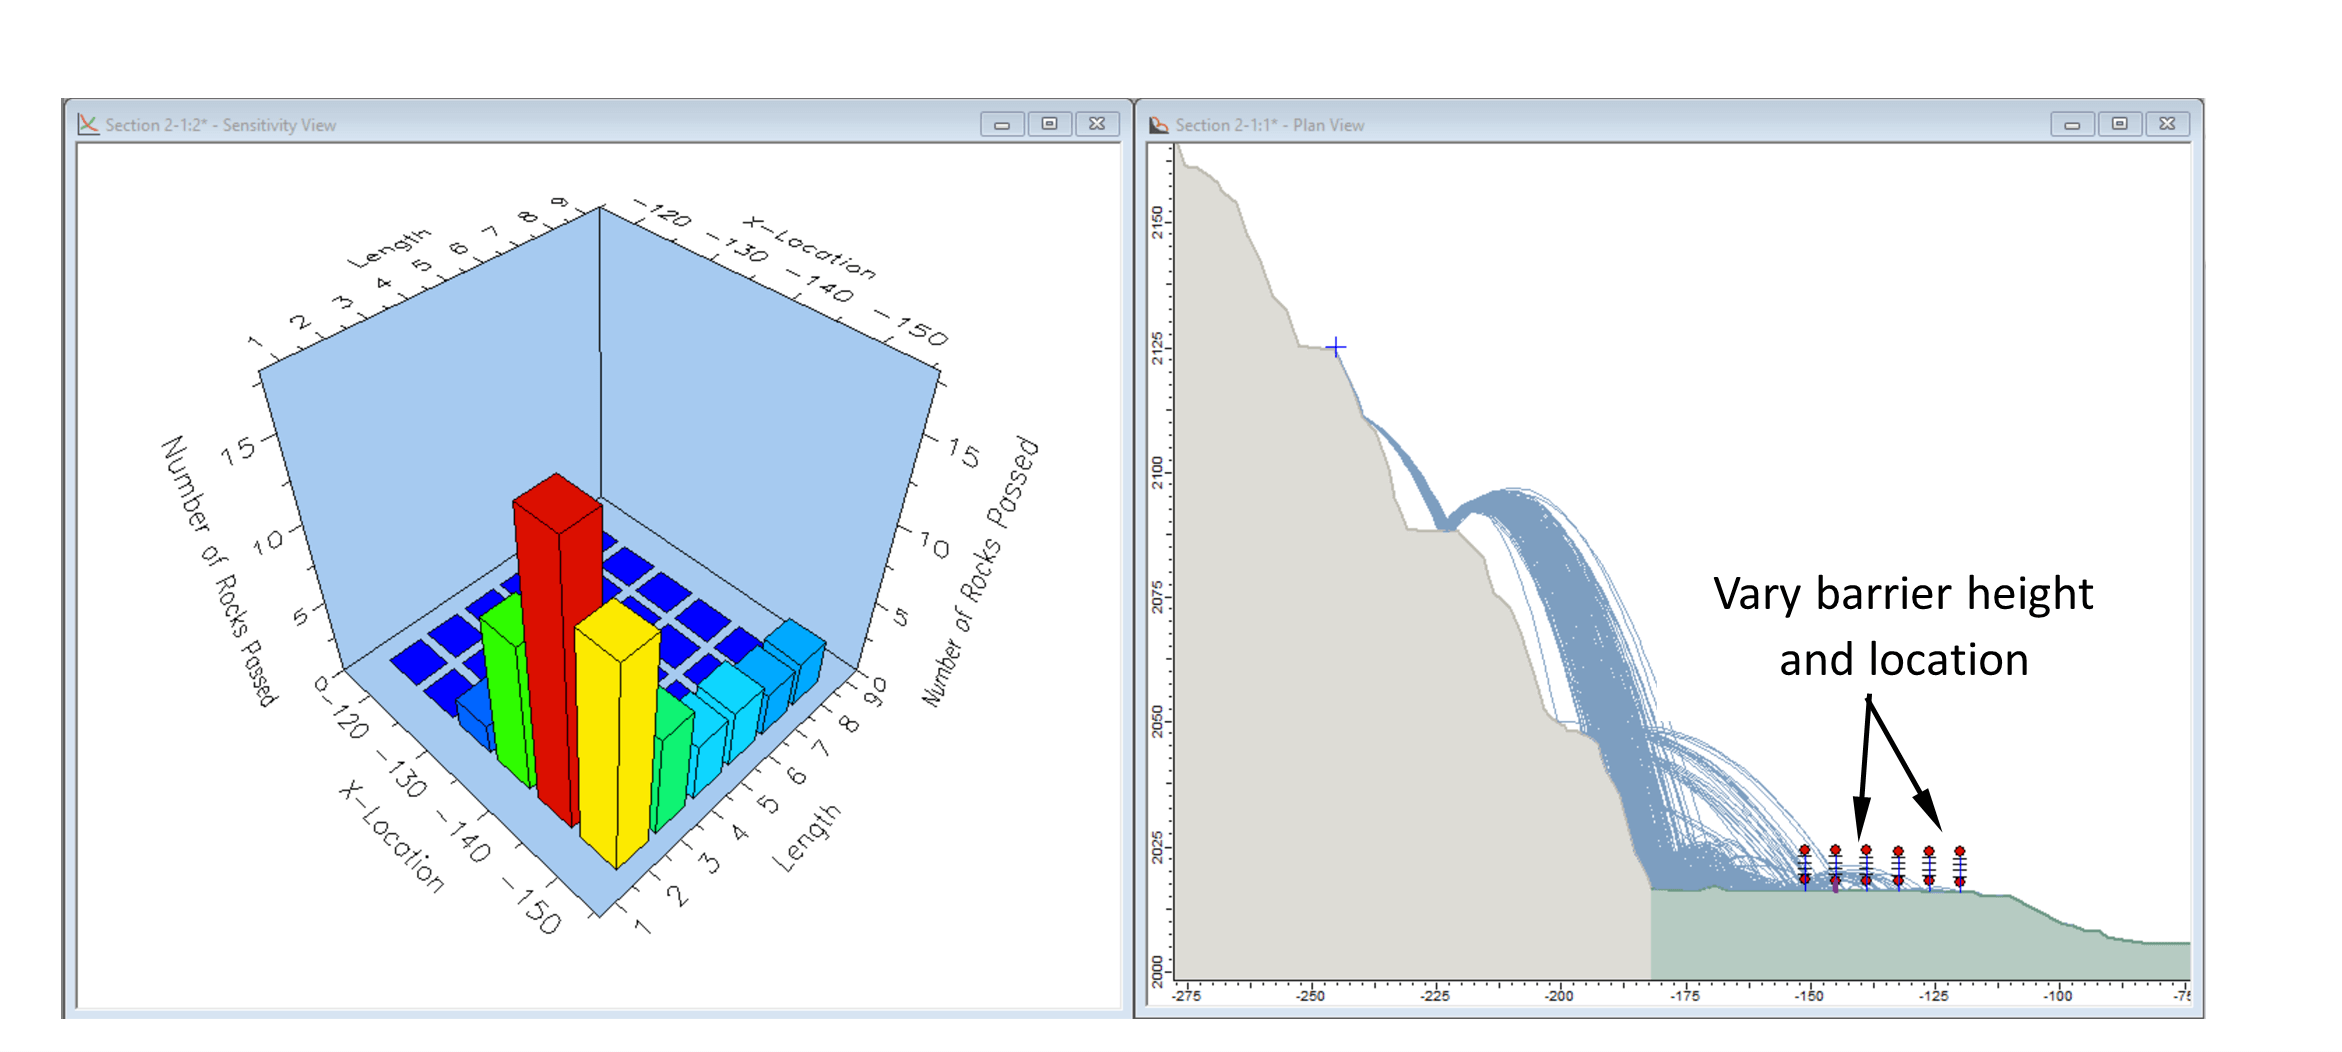 Optimize barrier design using RocFall2 barrier sensitivity analysis; vary barrier location, height, inclination, and capacity; figure shows a double-variable sensitivity analysis, where the barrier design is analyzed for every combination of the two selected parameters (e.g., x-location and barrier height).